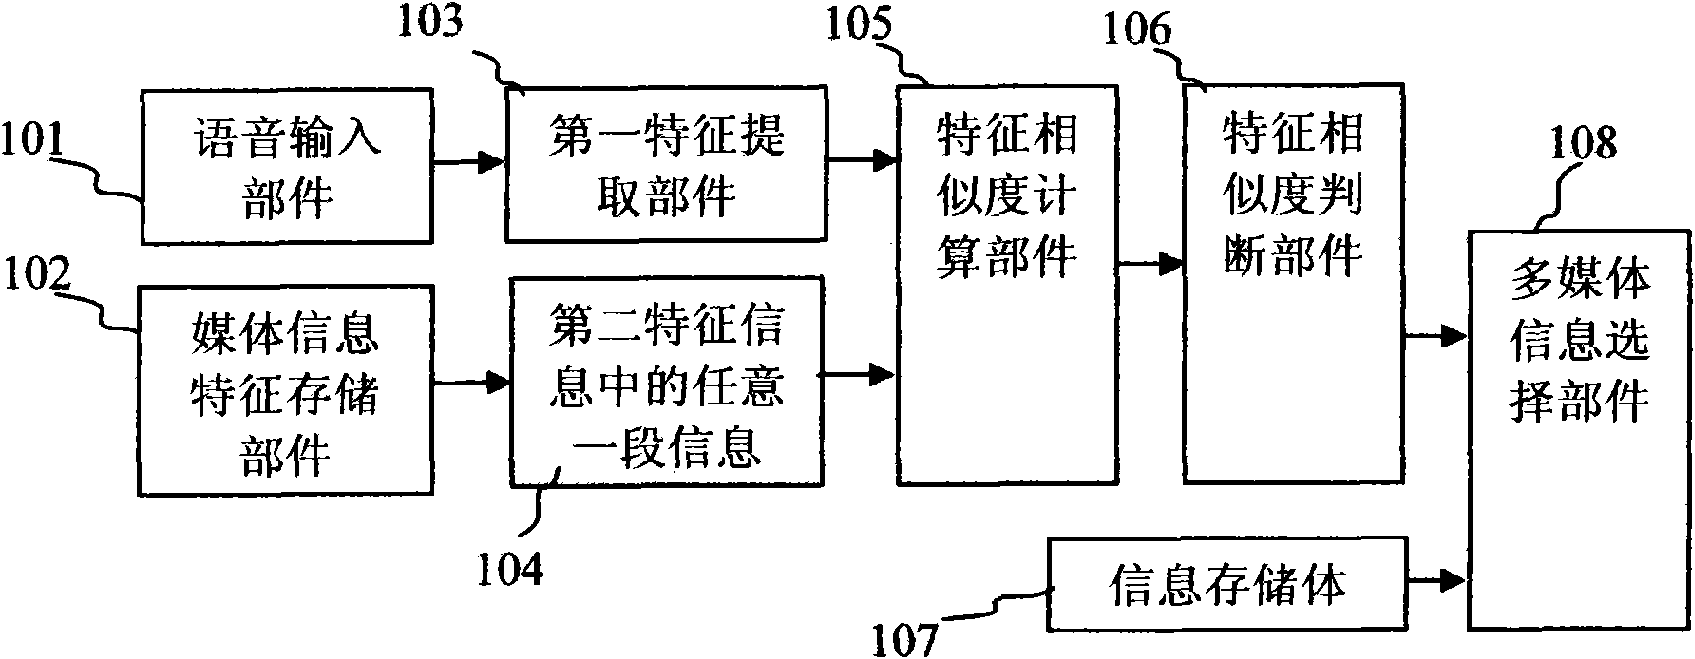 Network searching system and information searching method